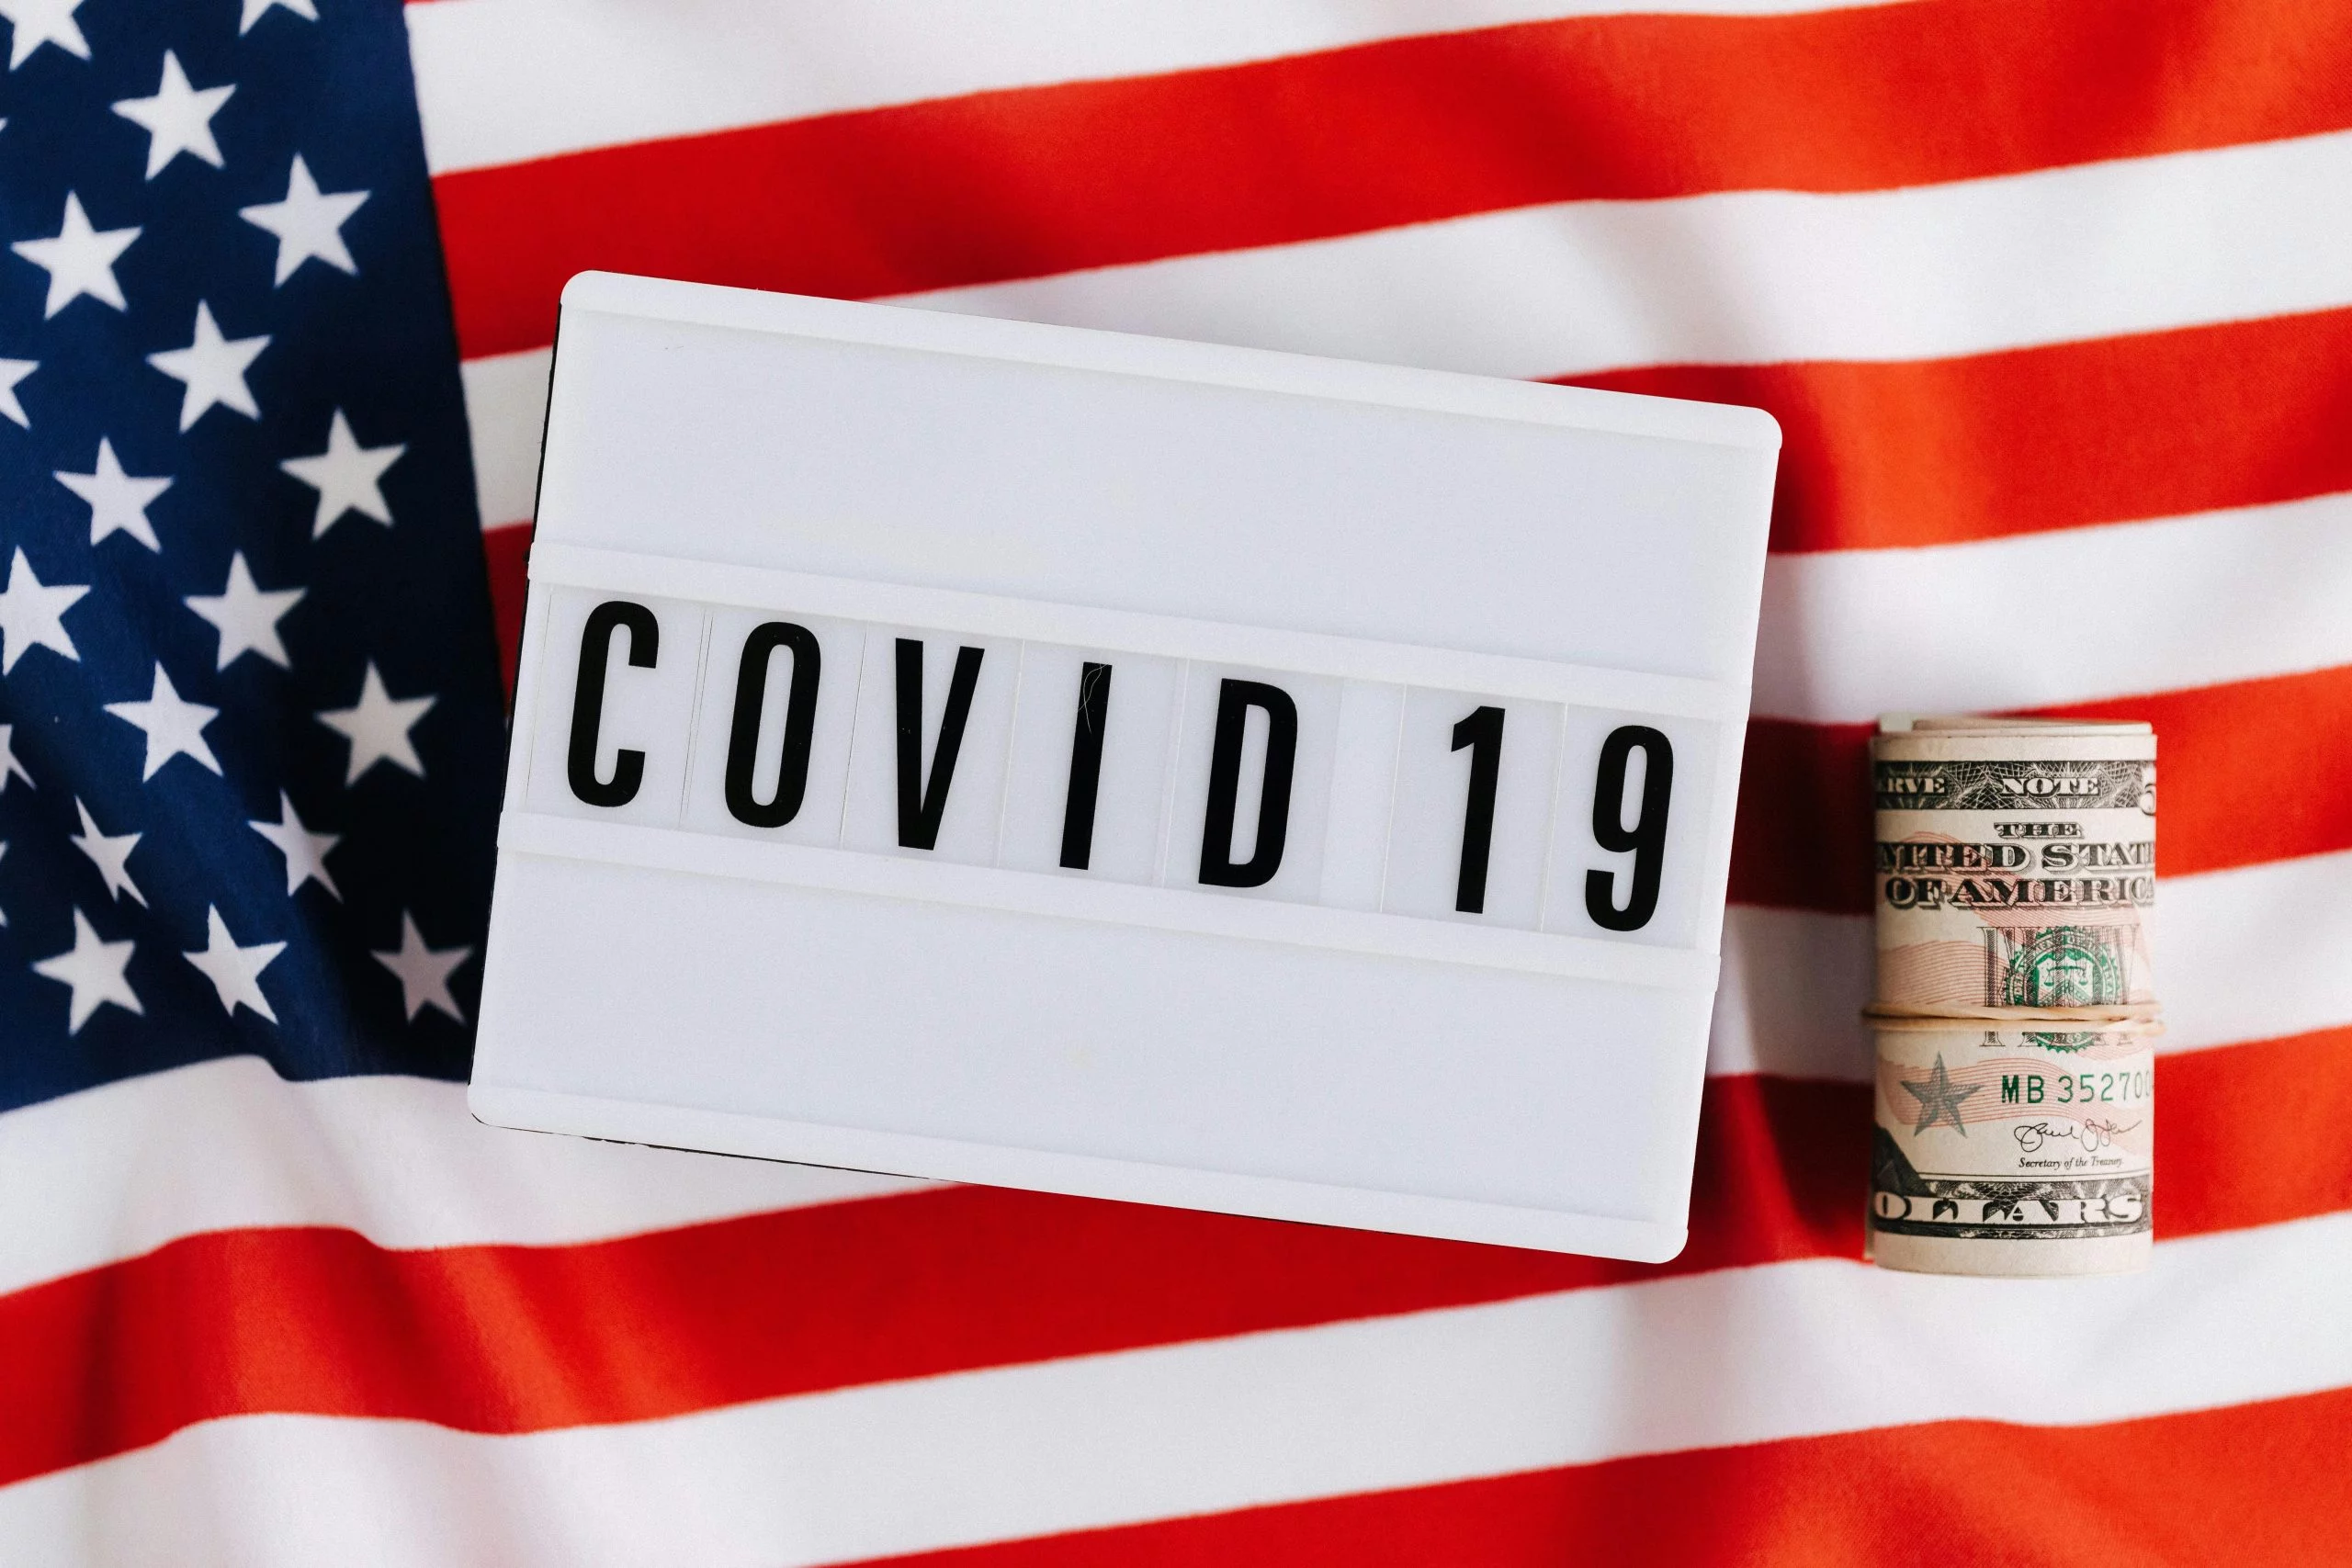 Fed’s Regulation II Is Predicated On Faulty COVID-19 Data